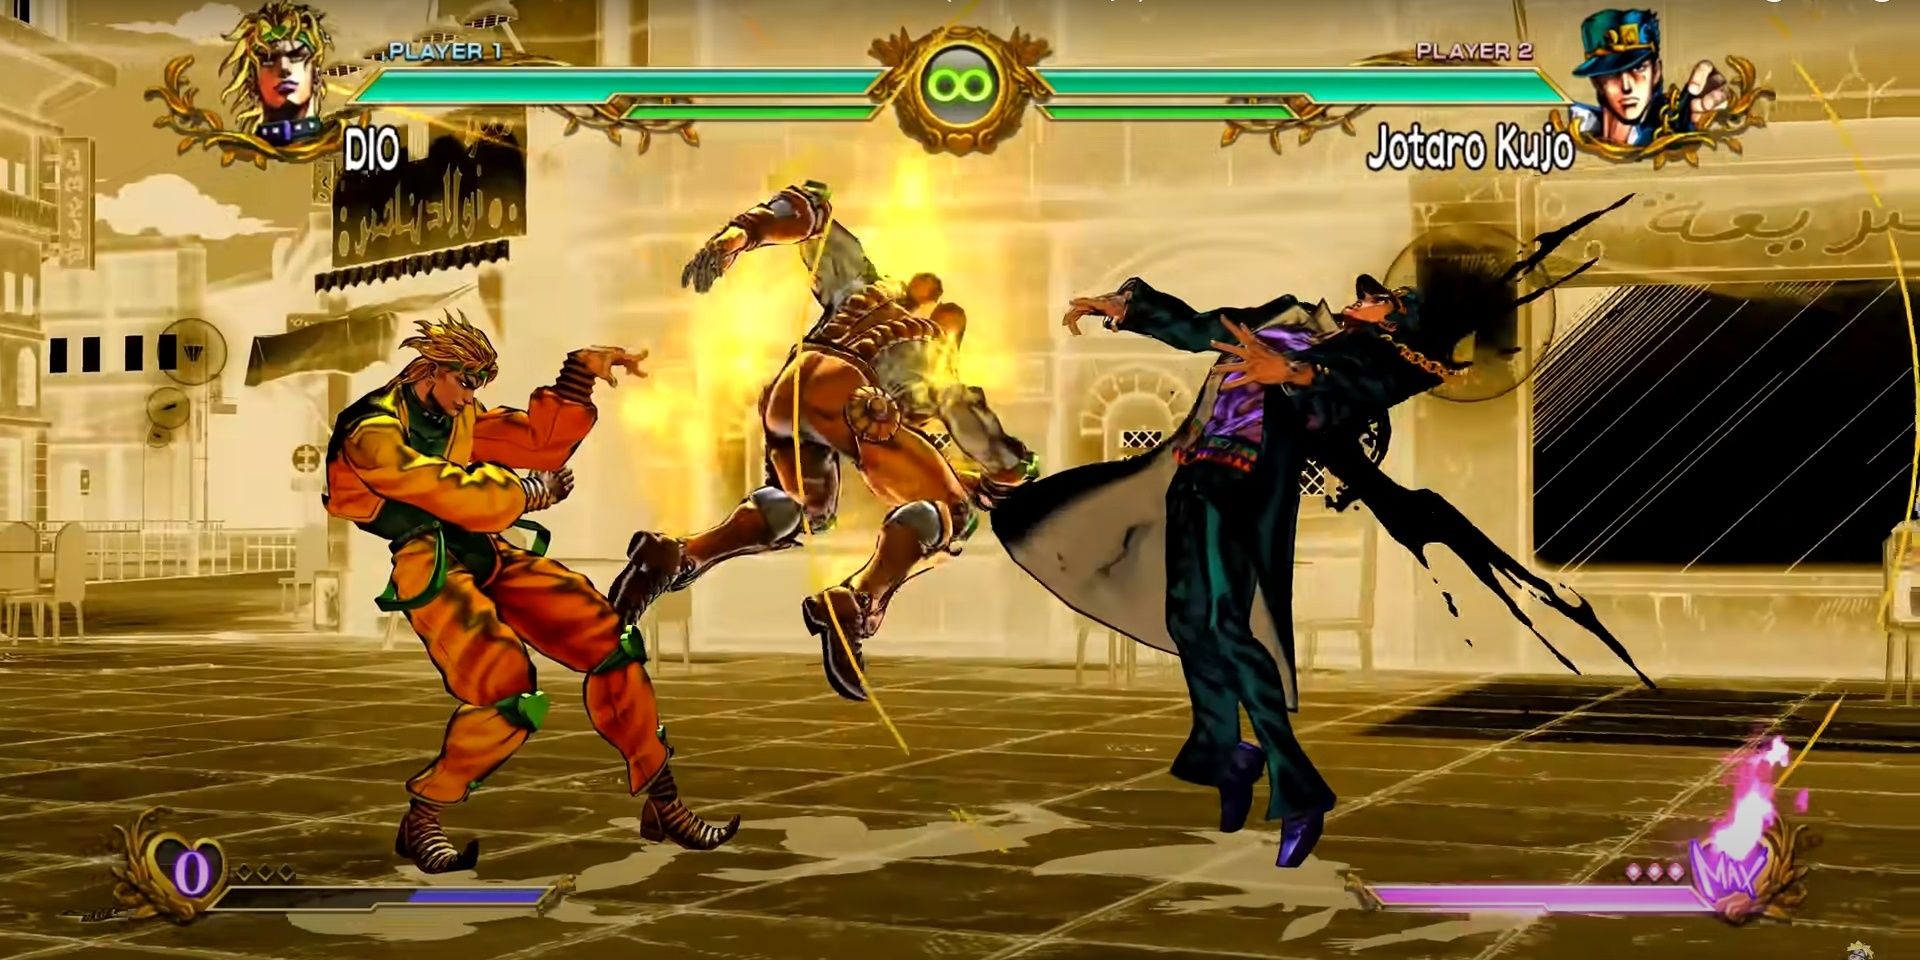 All star battle Gameplay DIO And Jotaro characters fighting